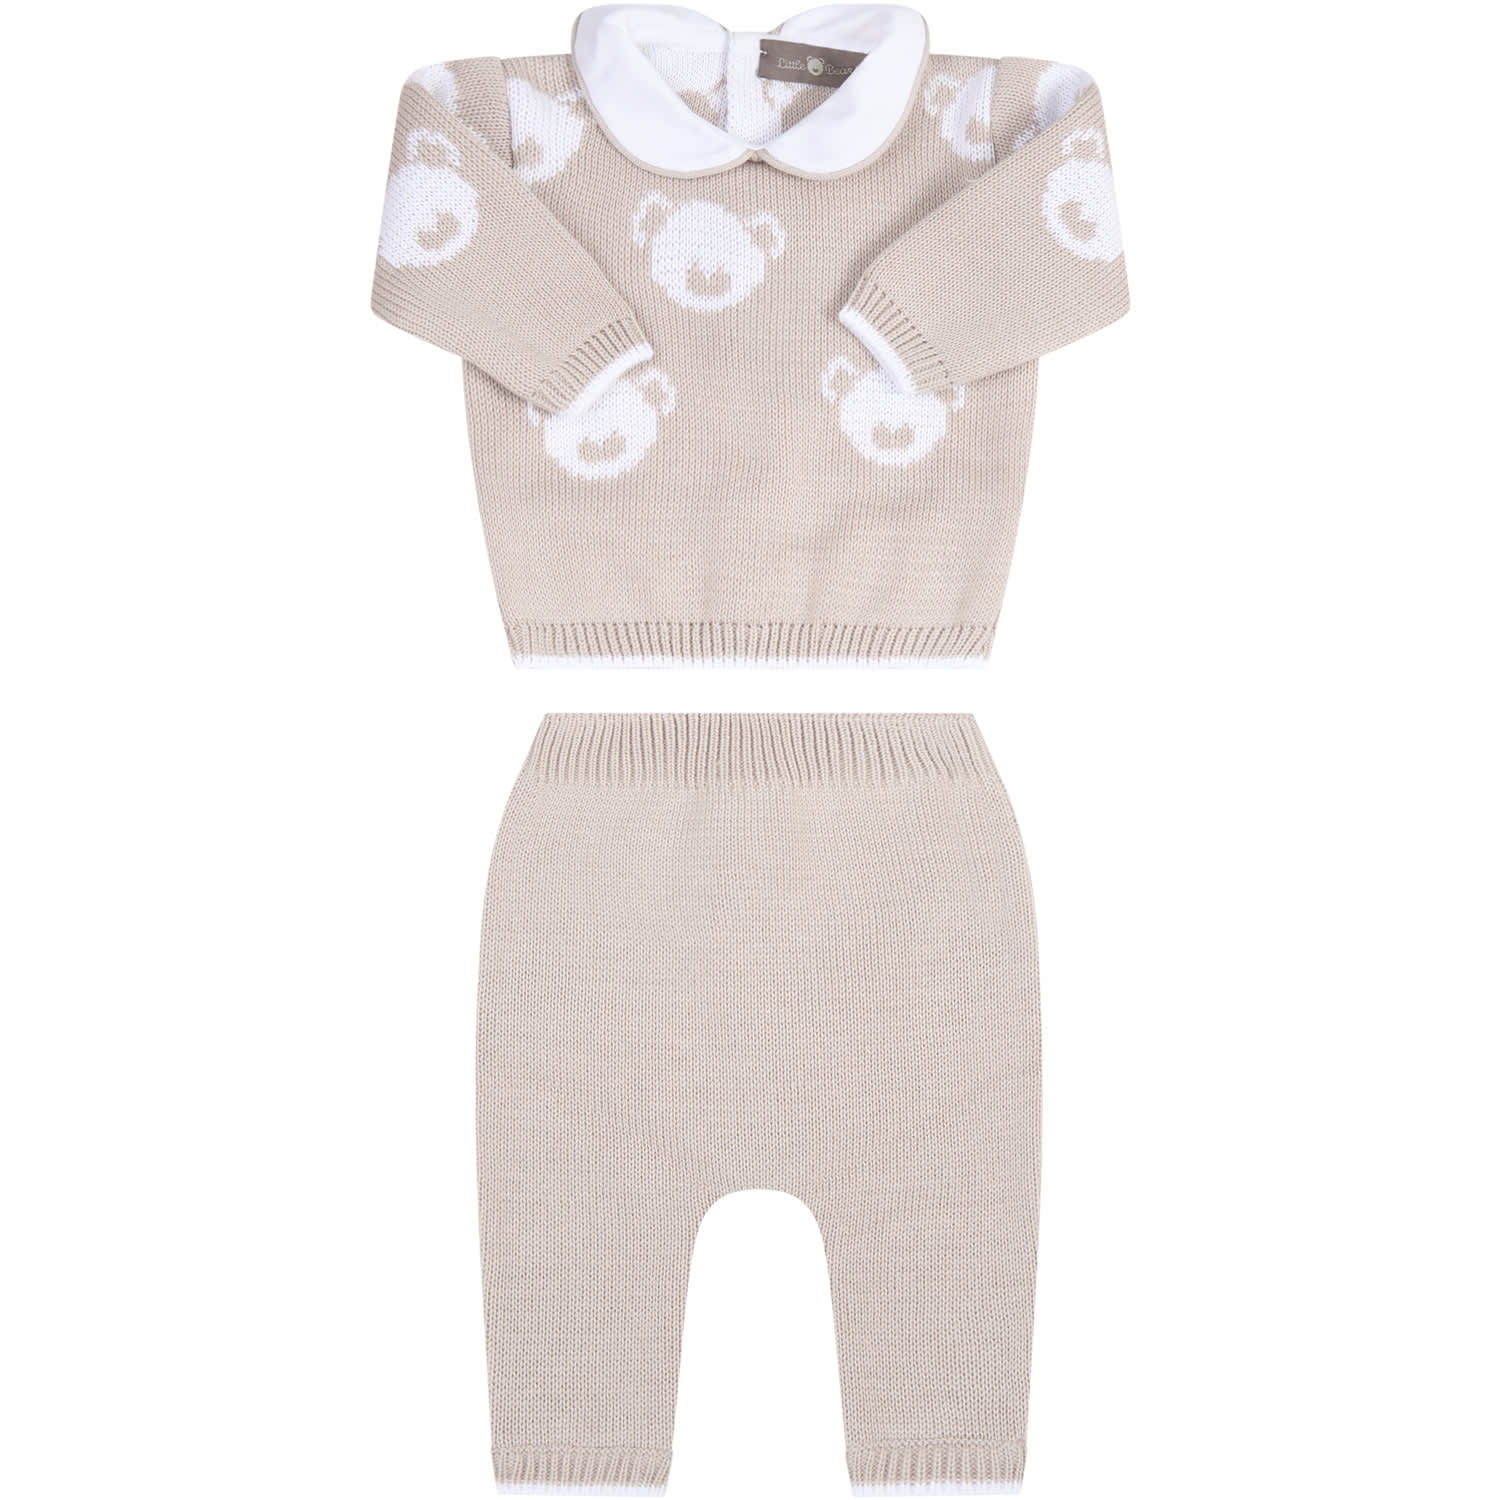 Little Bear Beige Suit For Baby Kids With Bears